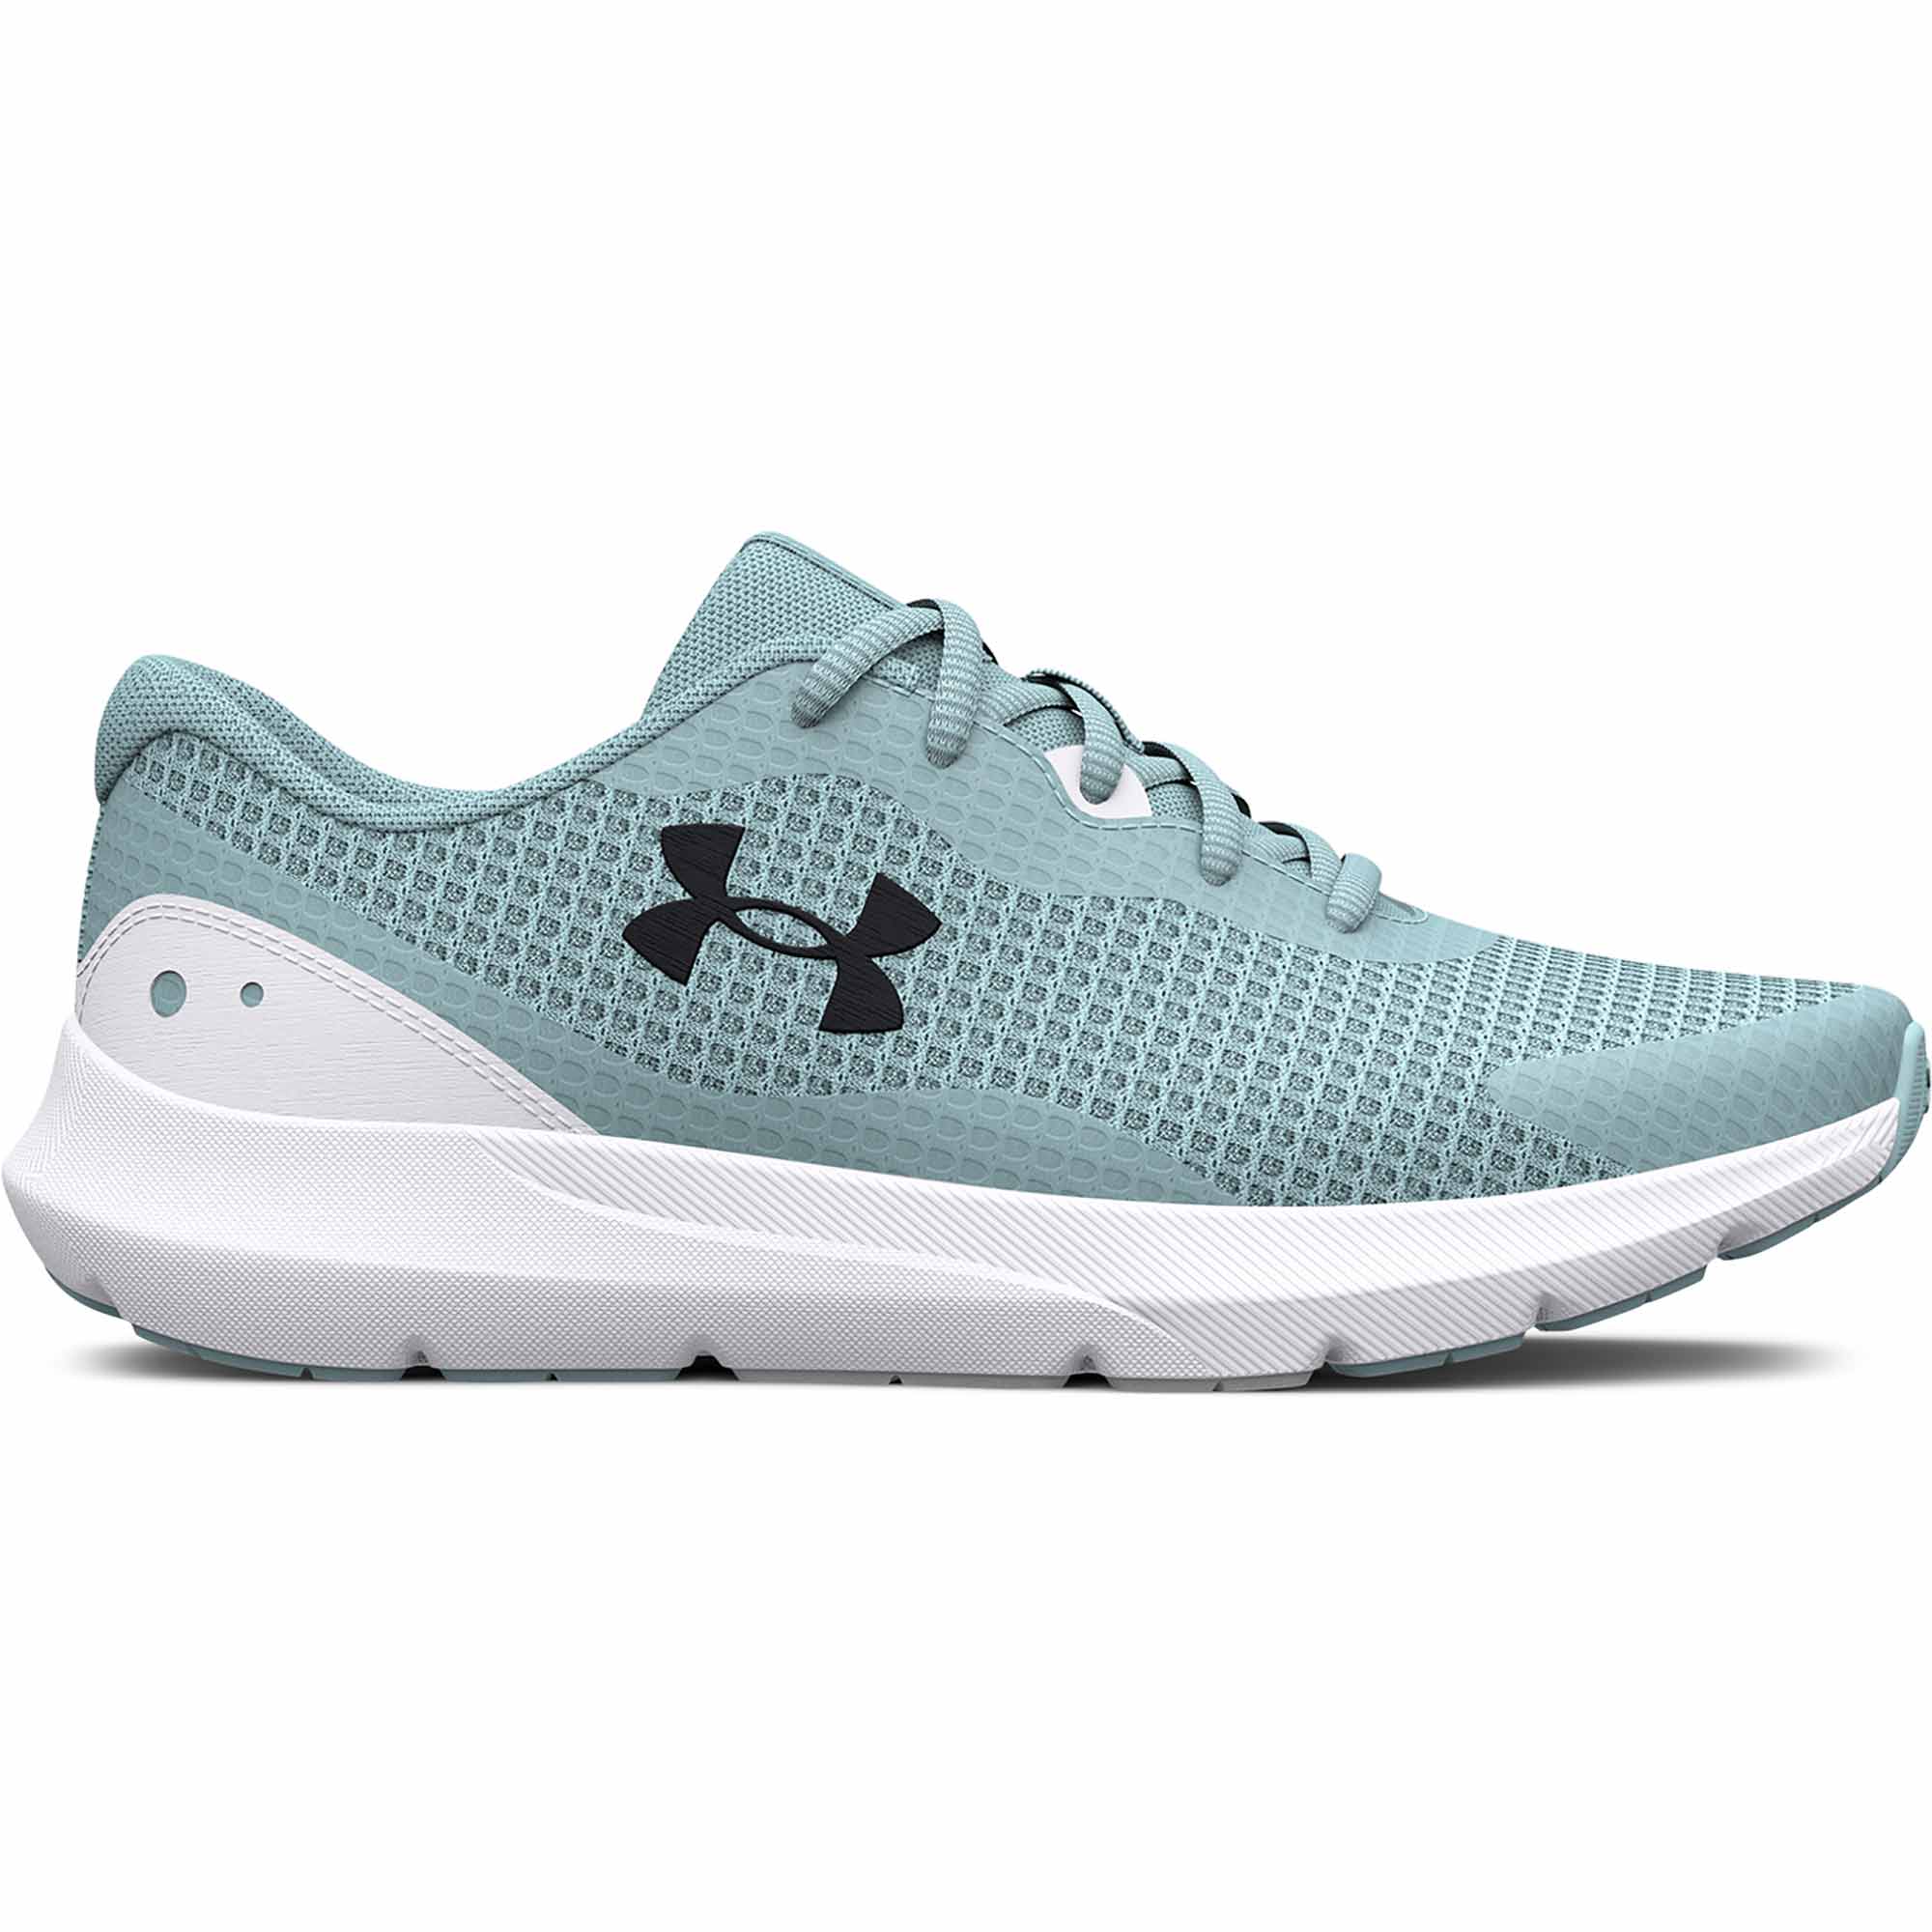 Under Armour Womens Surge 3 Running Shoes | Rebel Sport